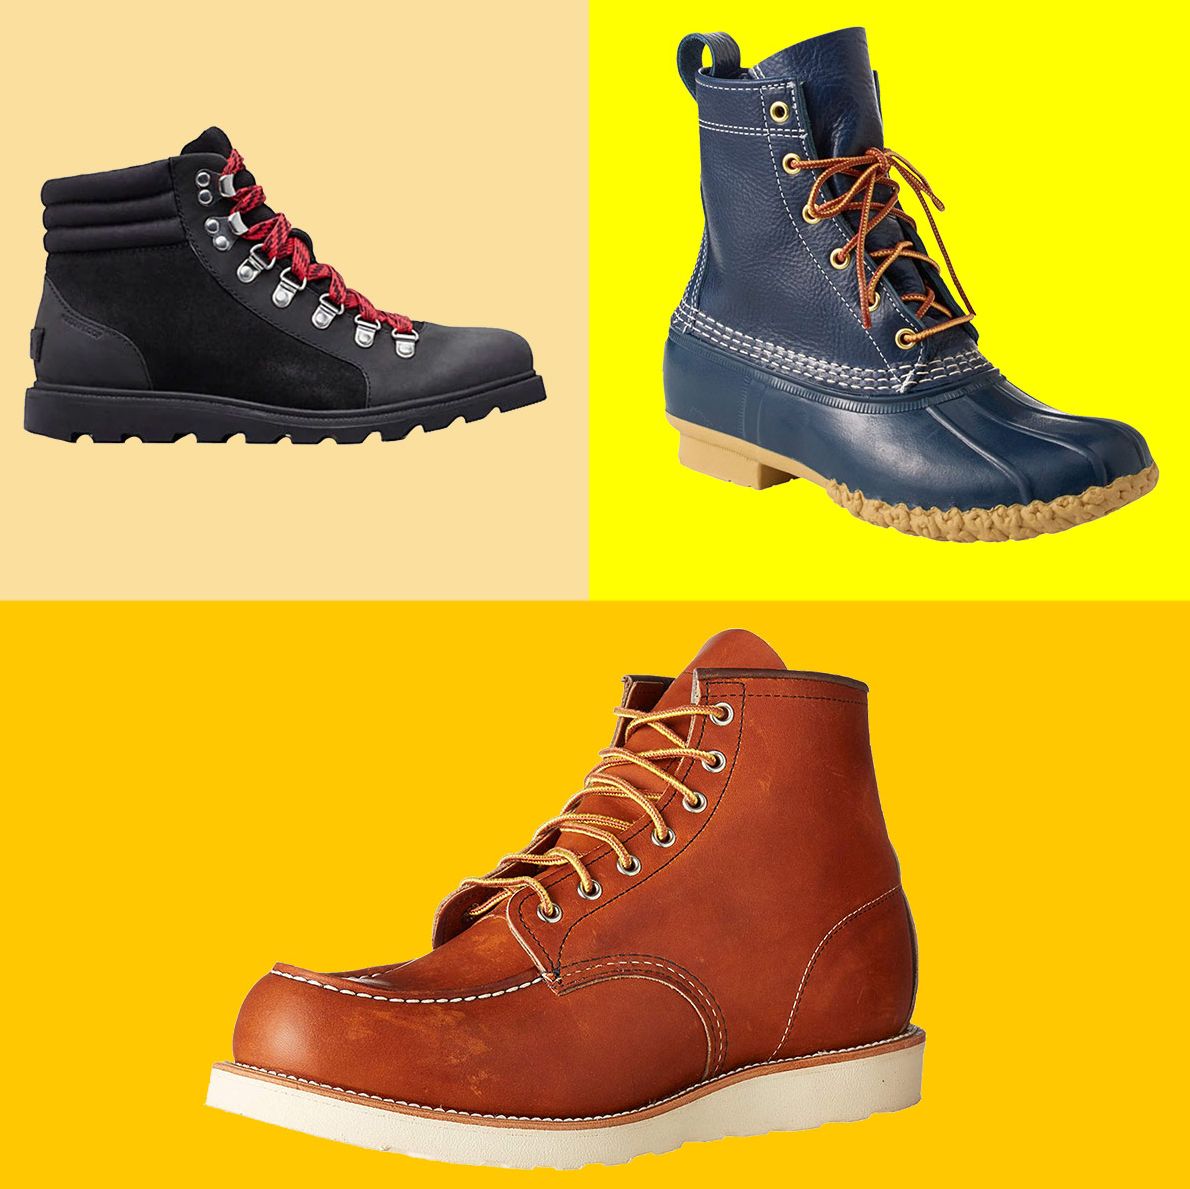 stores that carry blundstones